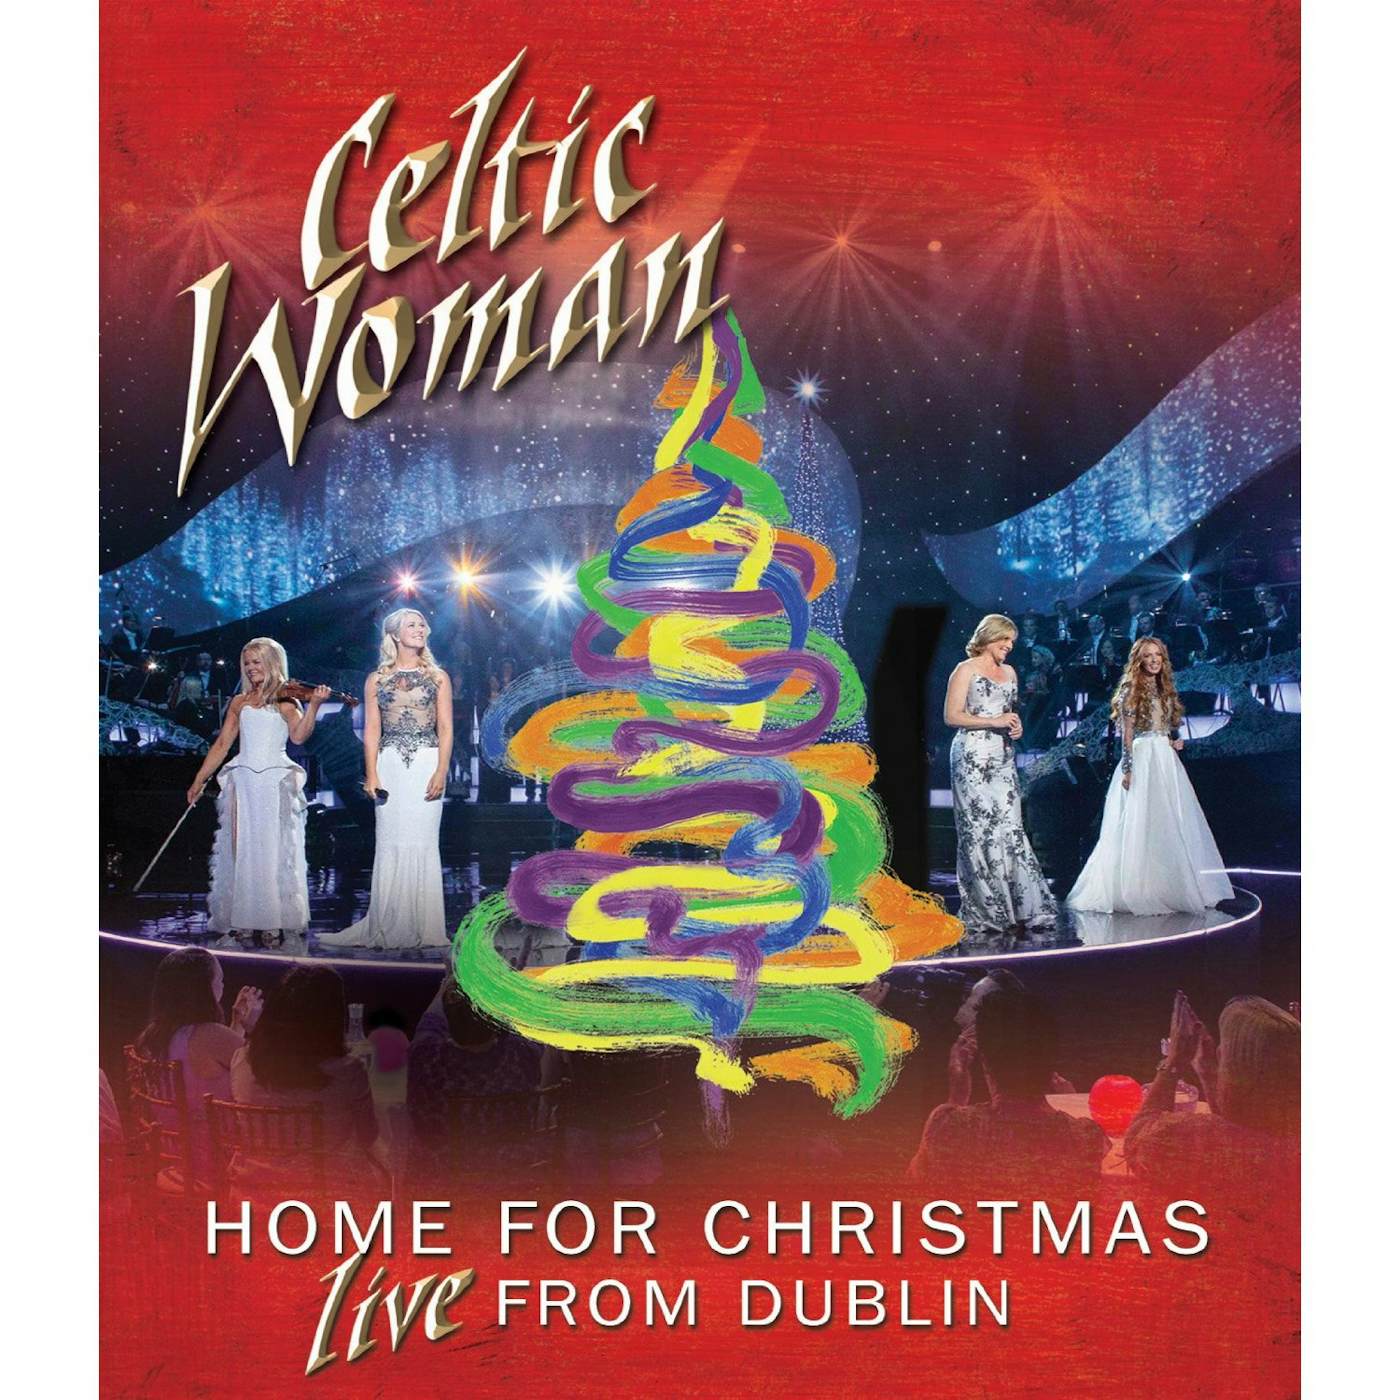 Celtic Woman HOME FOR CHRISTMAS: LIVE FROM DUBLIN DVD